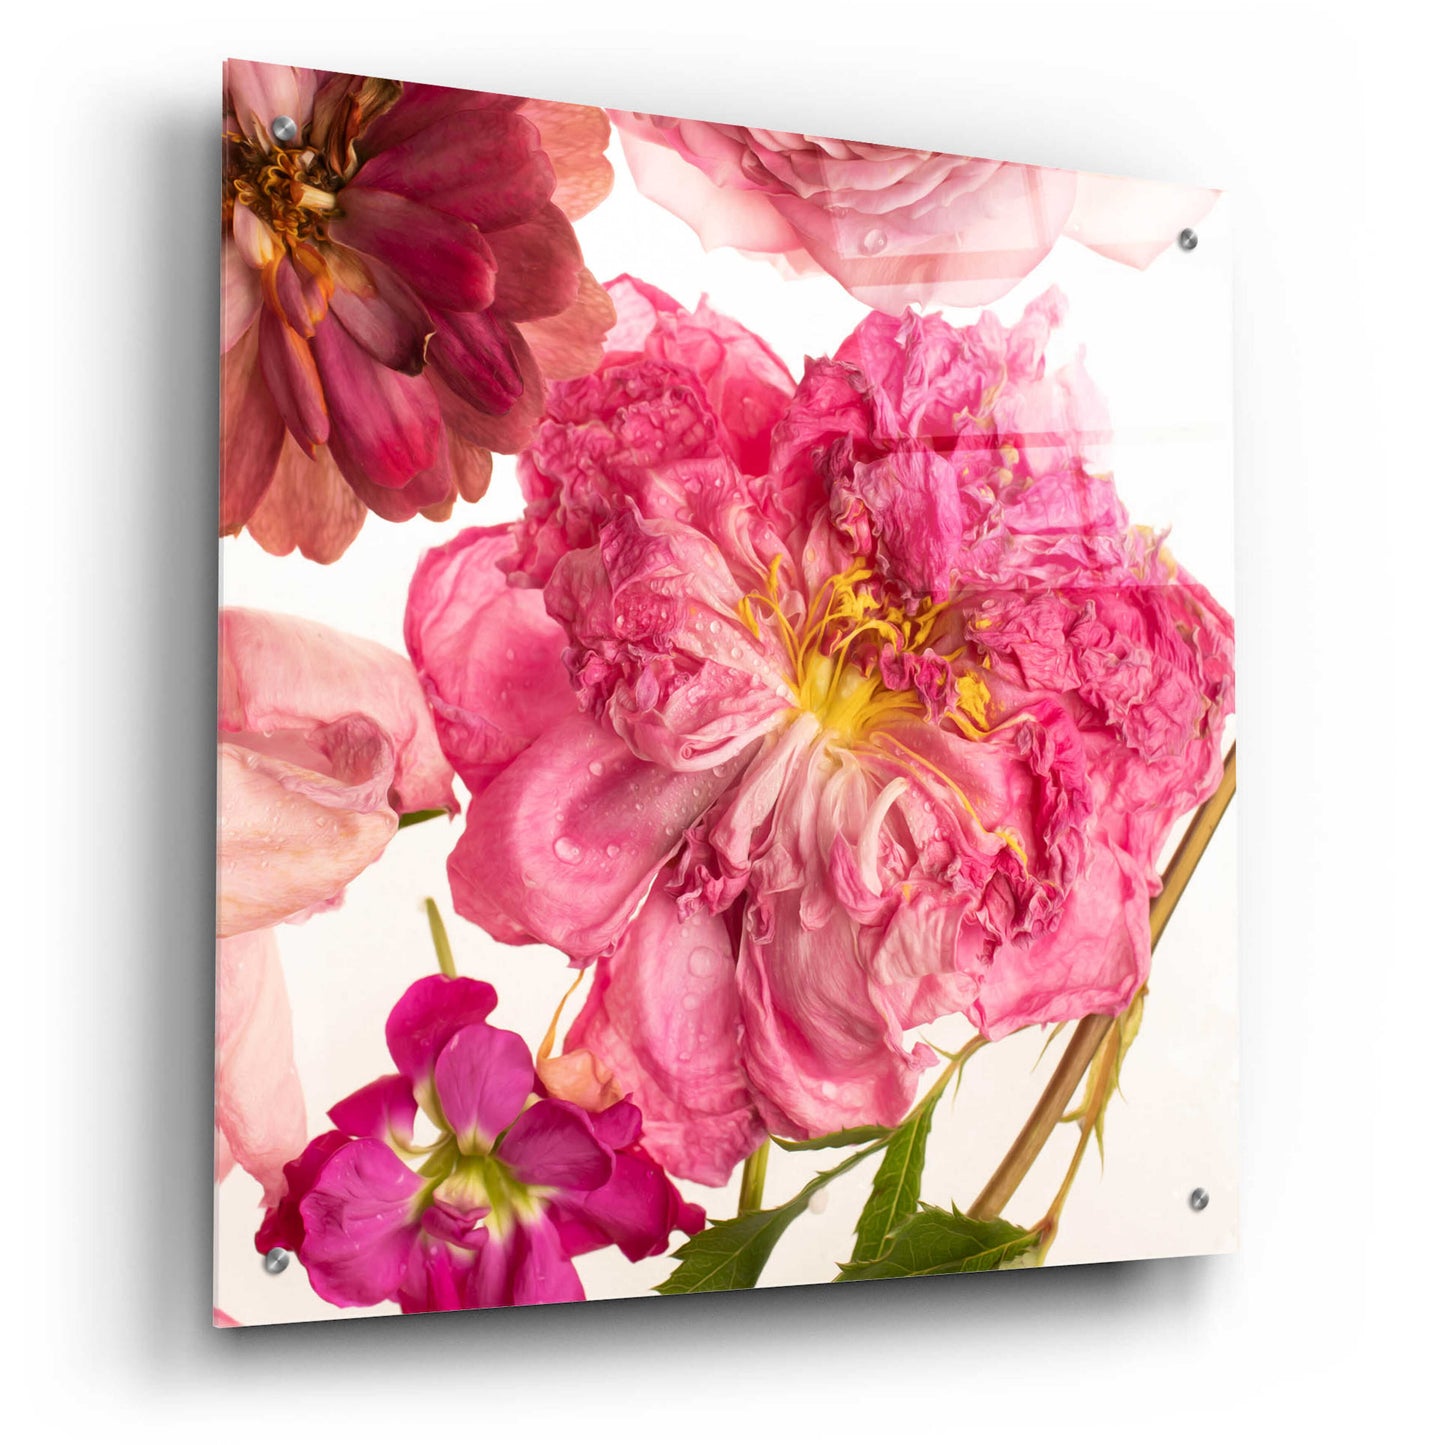 Epic Art 'Peony Dream on White' by Leah McLean, Acrylic Glass Wall Art,24x24